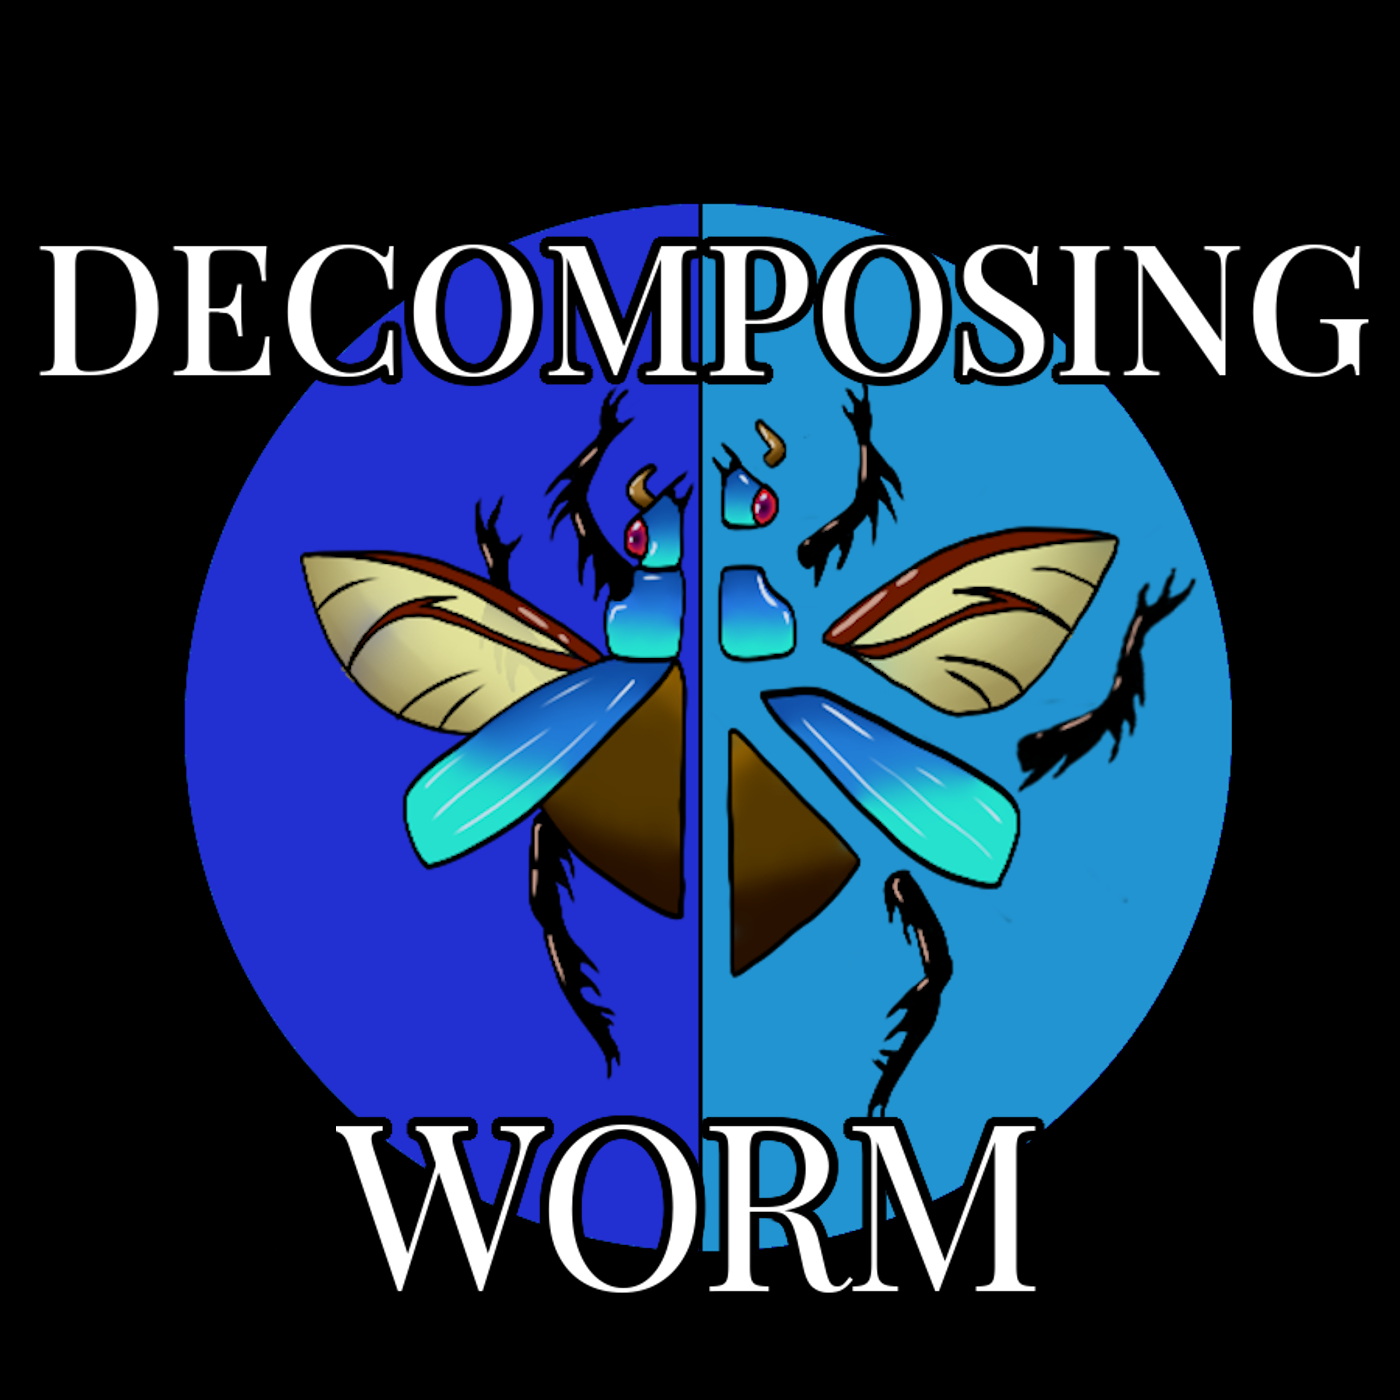 Announcing Decomposing Worm